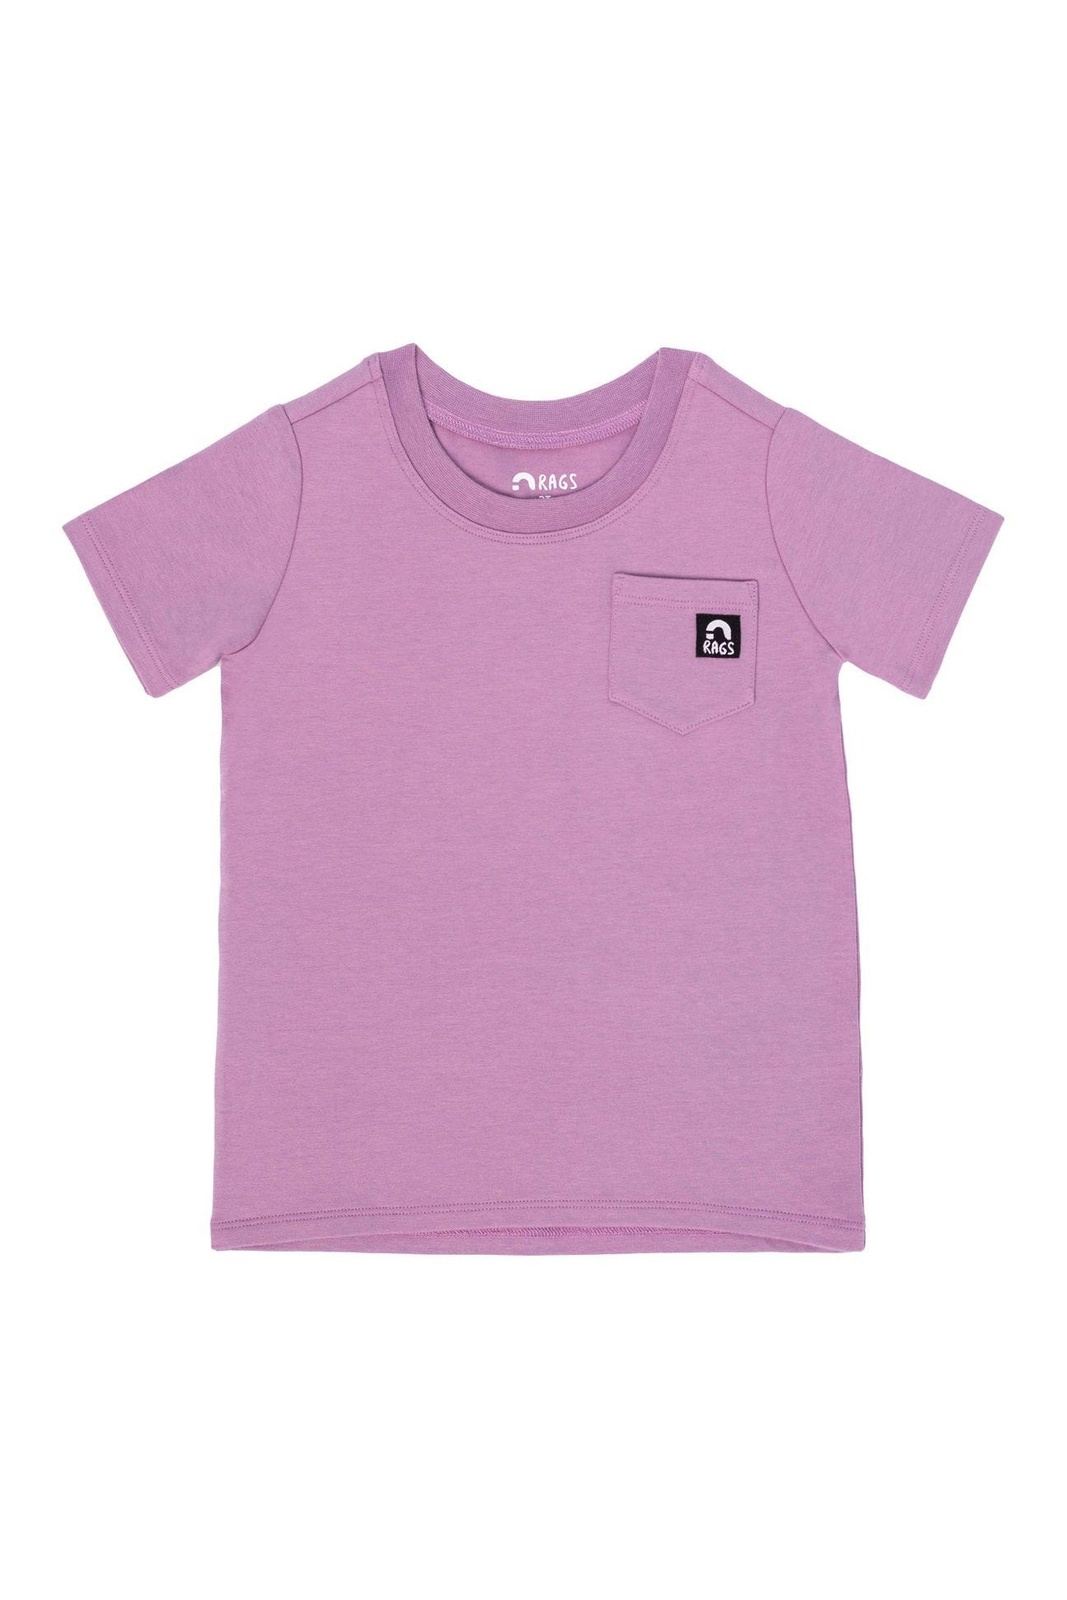 Essentials Short Sleeve Chest Pocket Rounded Tee - 'Lavender' - Tea for Three: A Children's Boutique-New Arrivals-TheT43Shop